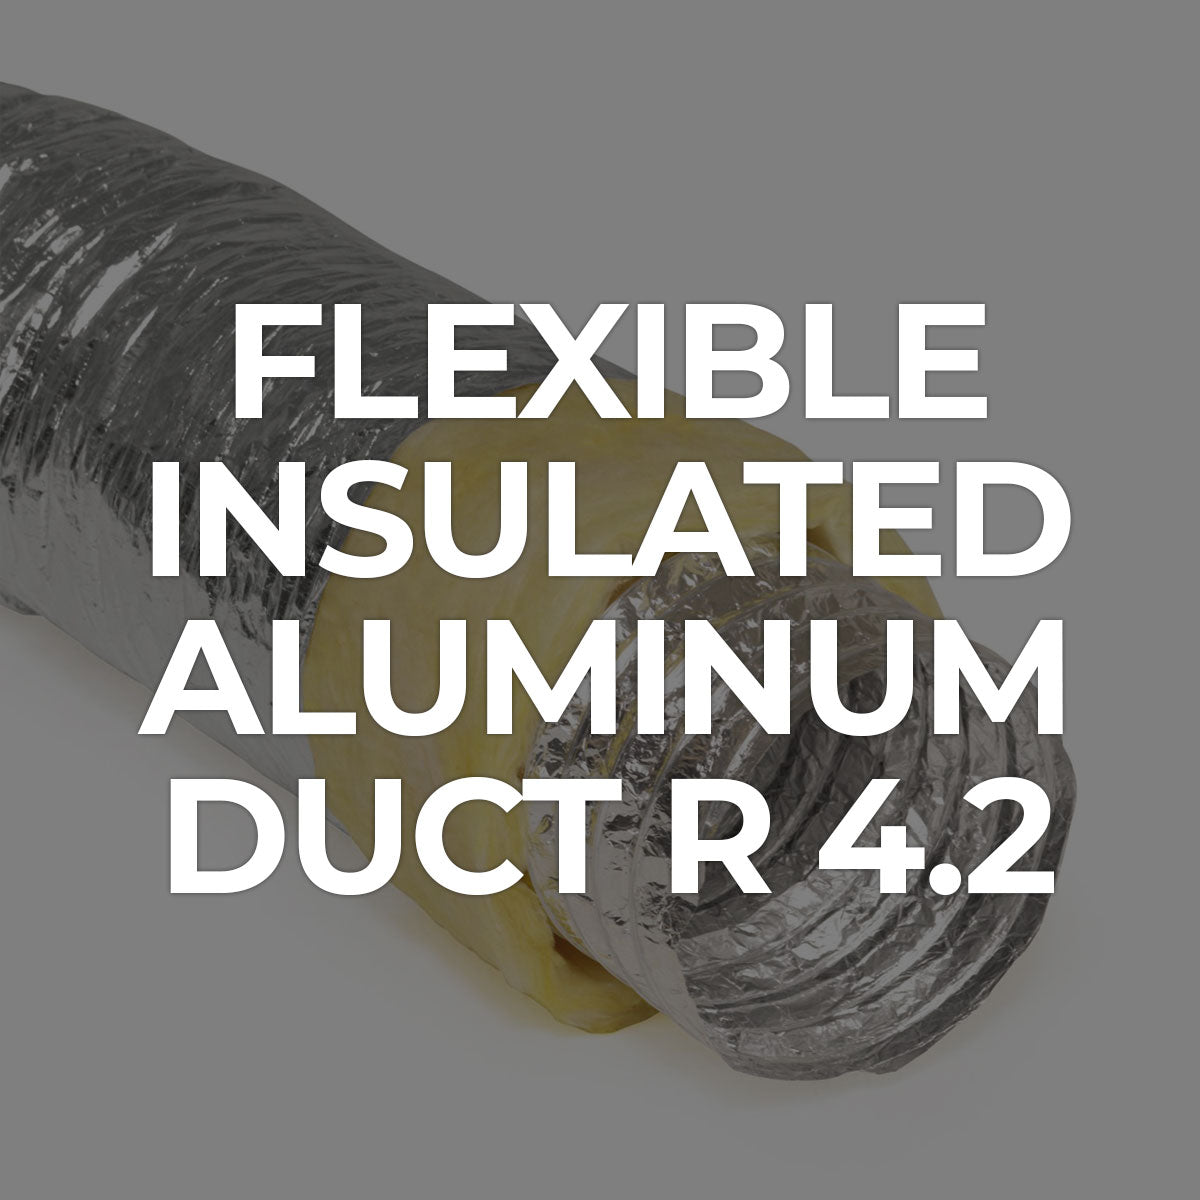 Search by Collections: Flexible insulated aluminum duct R 4.2